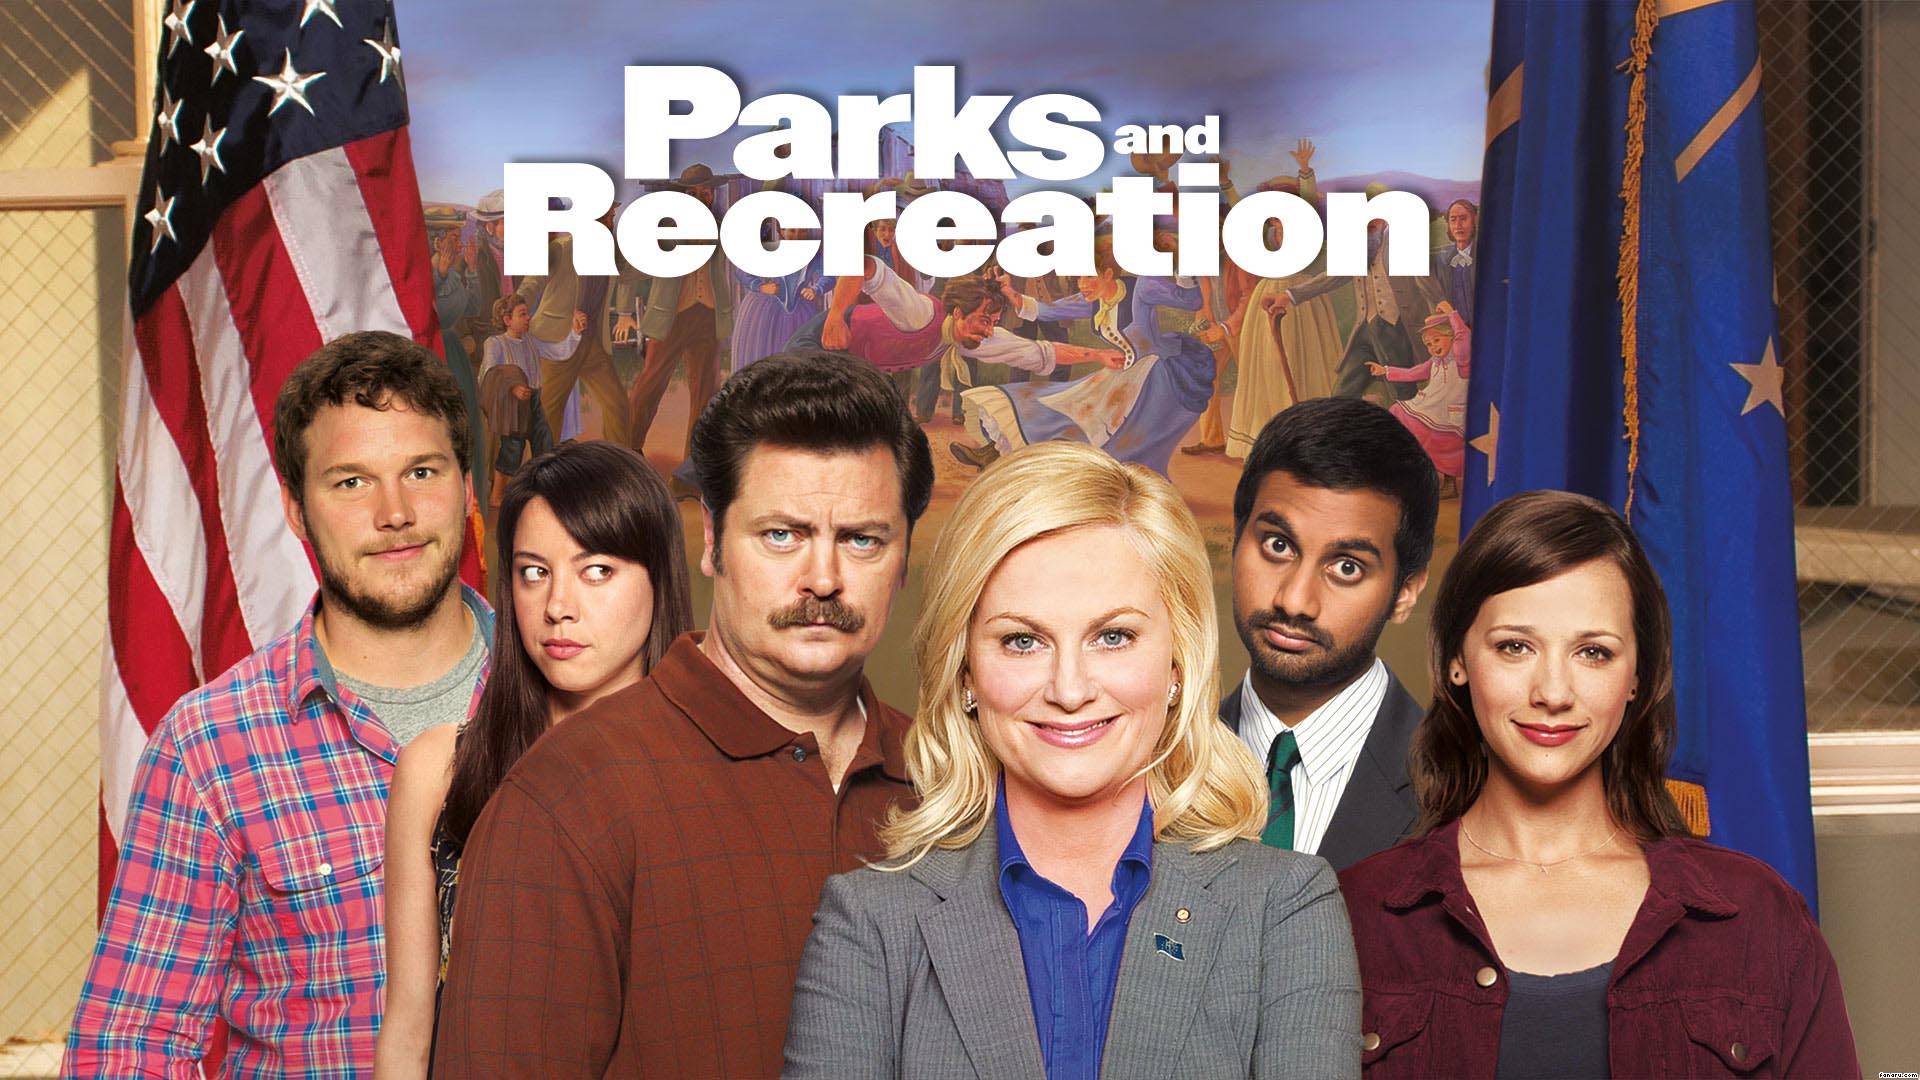 Hq Wallpaper Parks And Recreation For Mobile